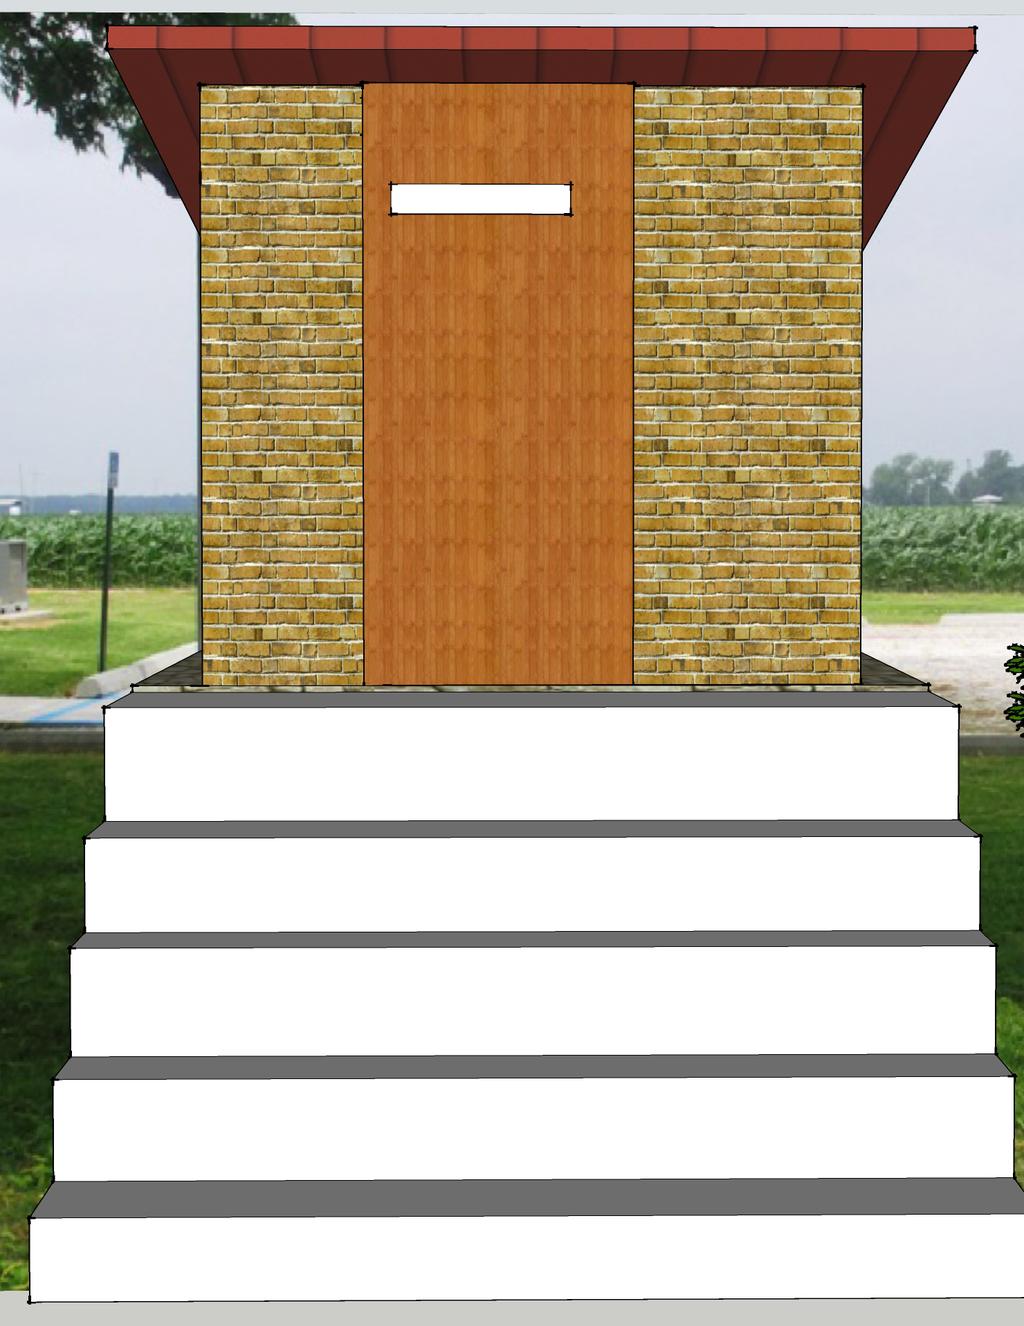 Composting latrine Material Estimate Item Cement (50 Kgs bags) Pipe 100mm or 150mmdiameter (10 long) Sliding bolt Tower bolt Handle Nails Hinges Wood 1 x 12 Wood 2 x 3 Sand Gravel Stone Skilled